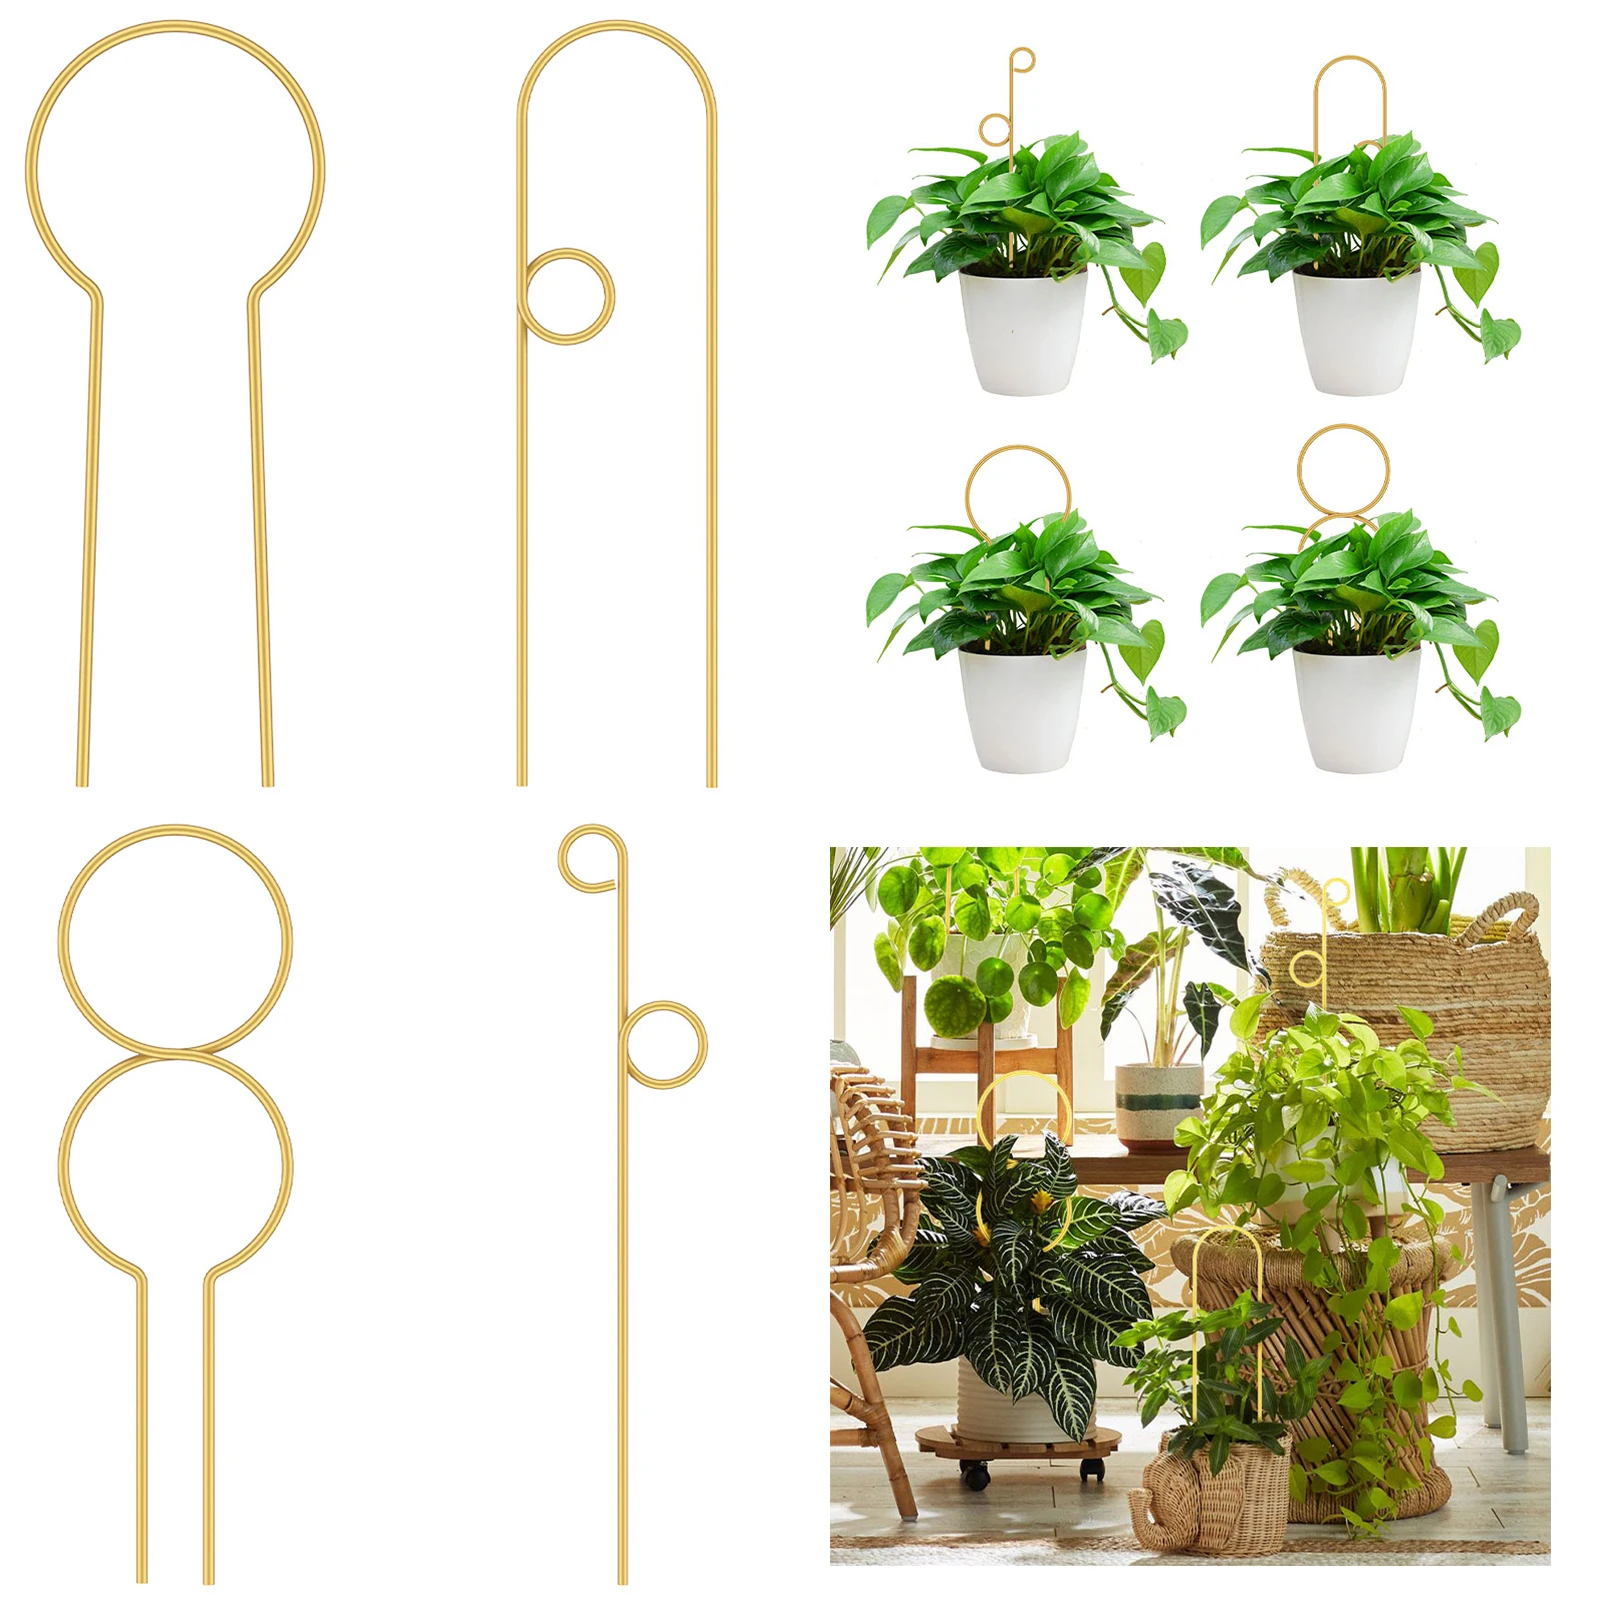 

4Pcs Plant Trellis Iron Plant Support Stake Weather Resistant Decorative Plant Climbing Rack Gardening Supplies for Indoor